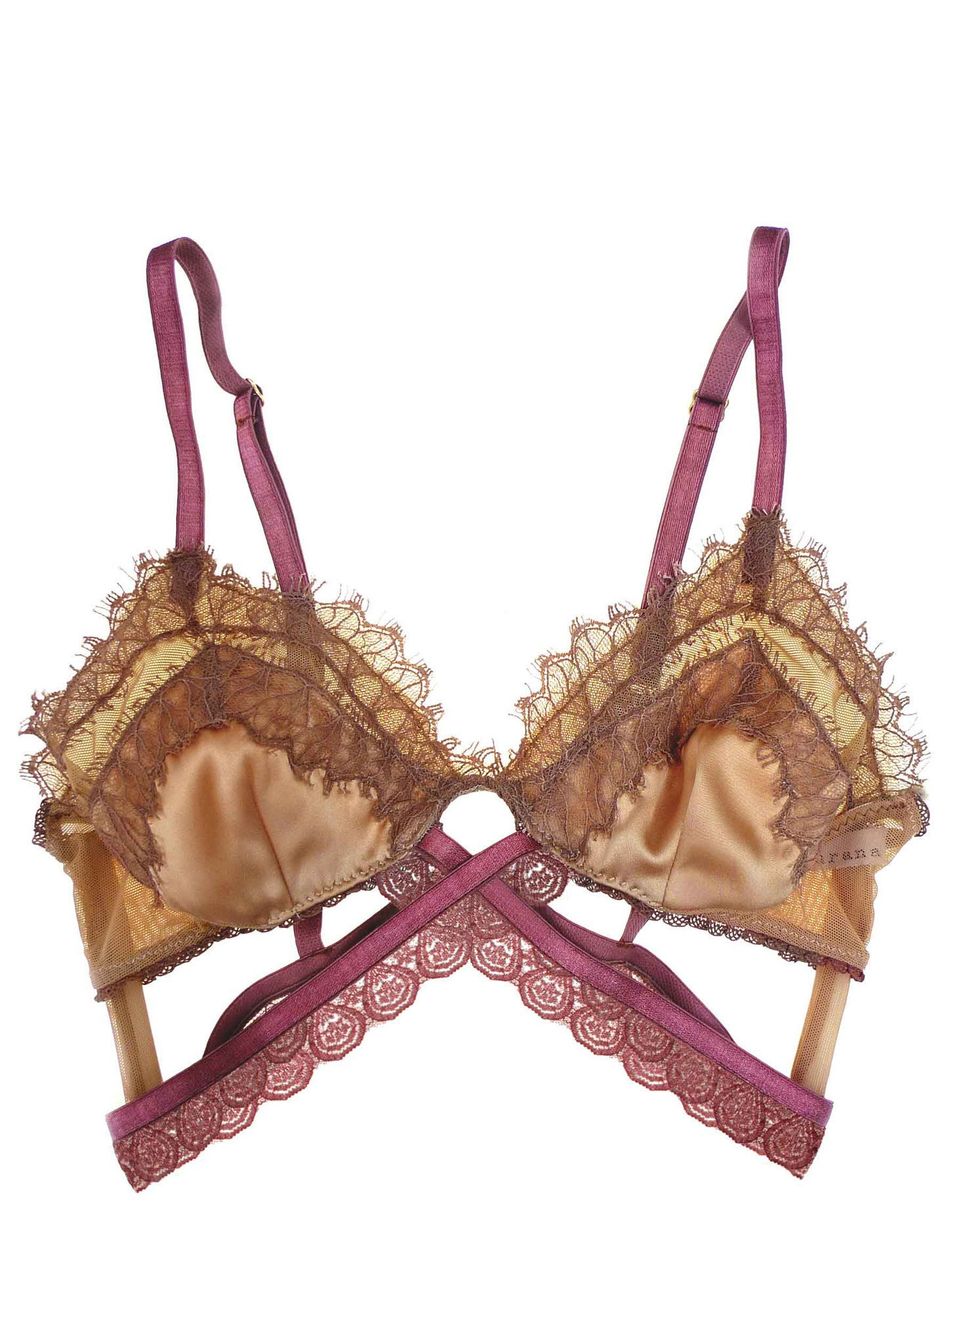 The Bra' is a tale of loss, love and lingerie